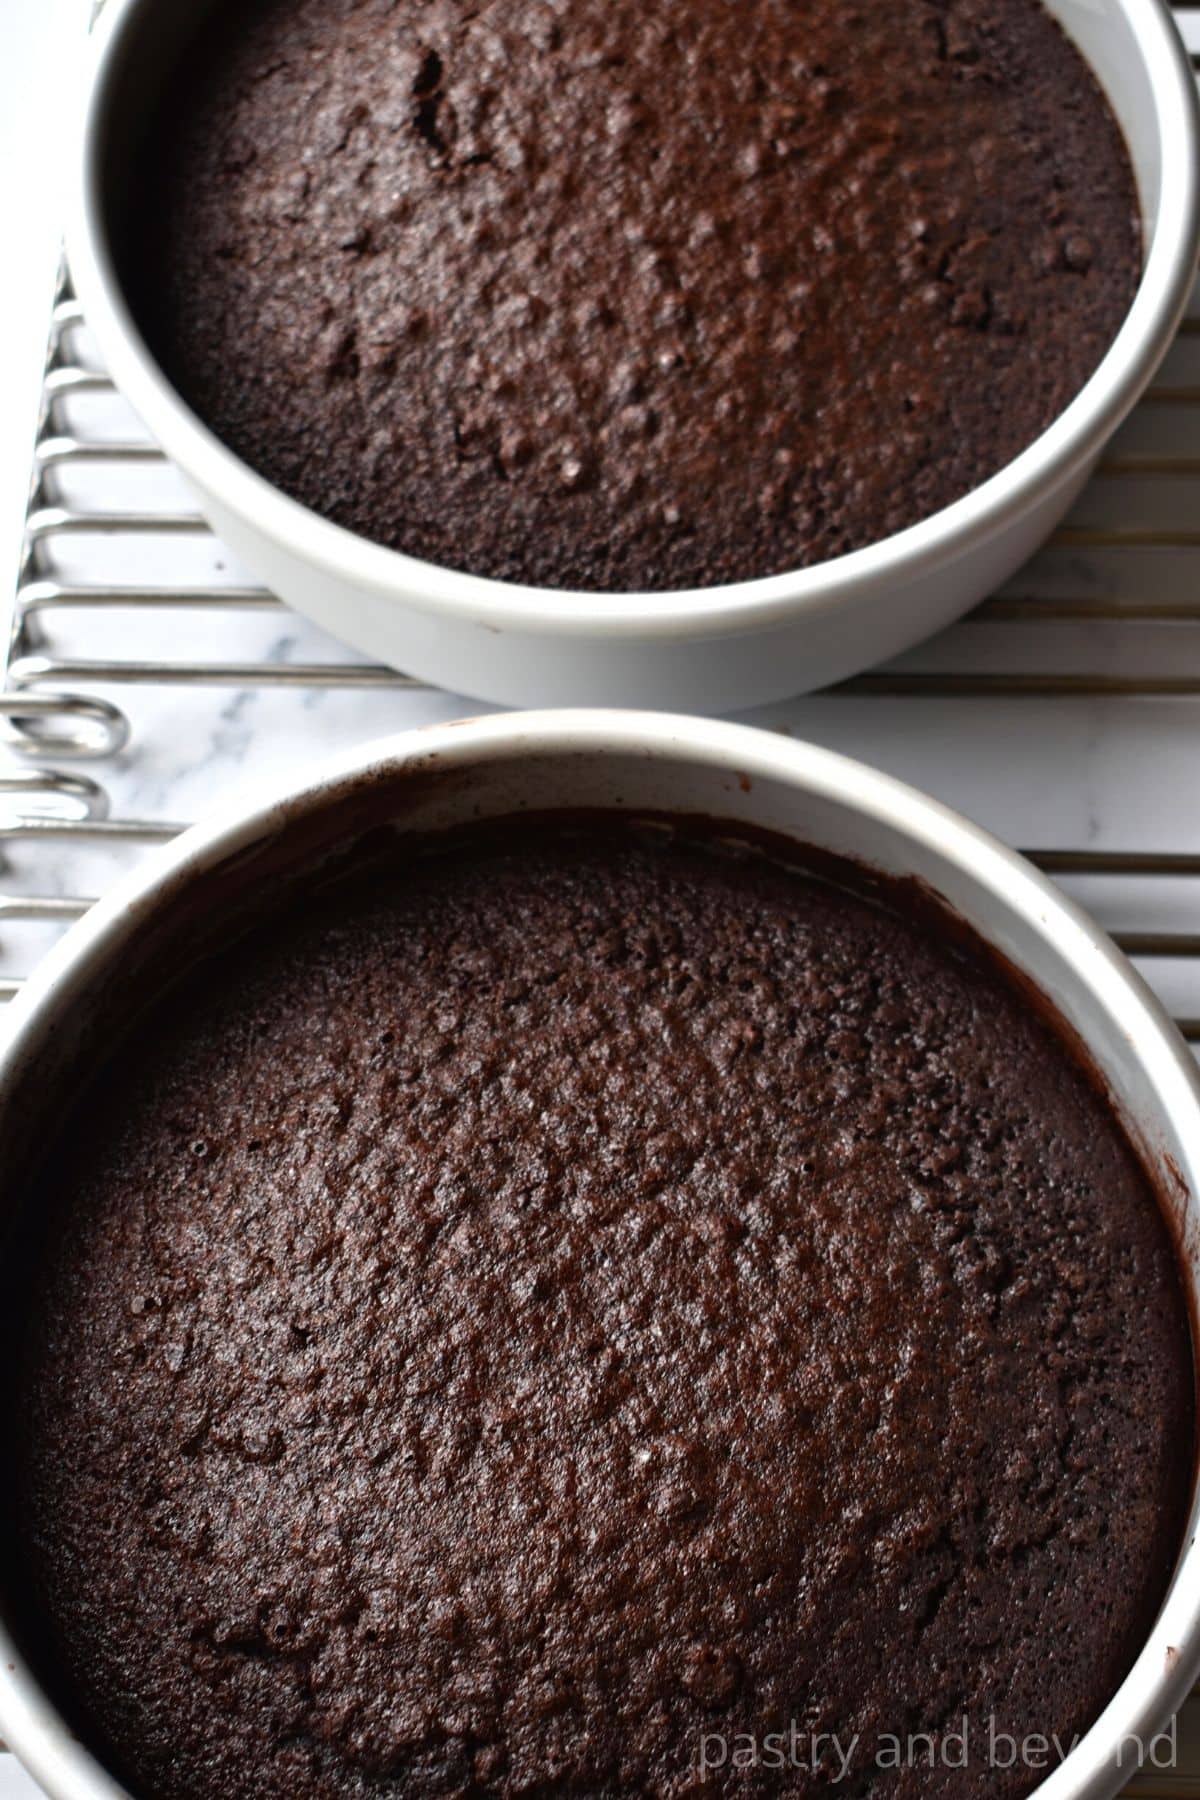 Baked cakes in their pans.